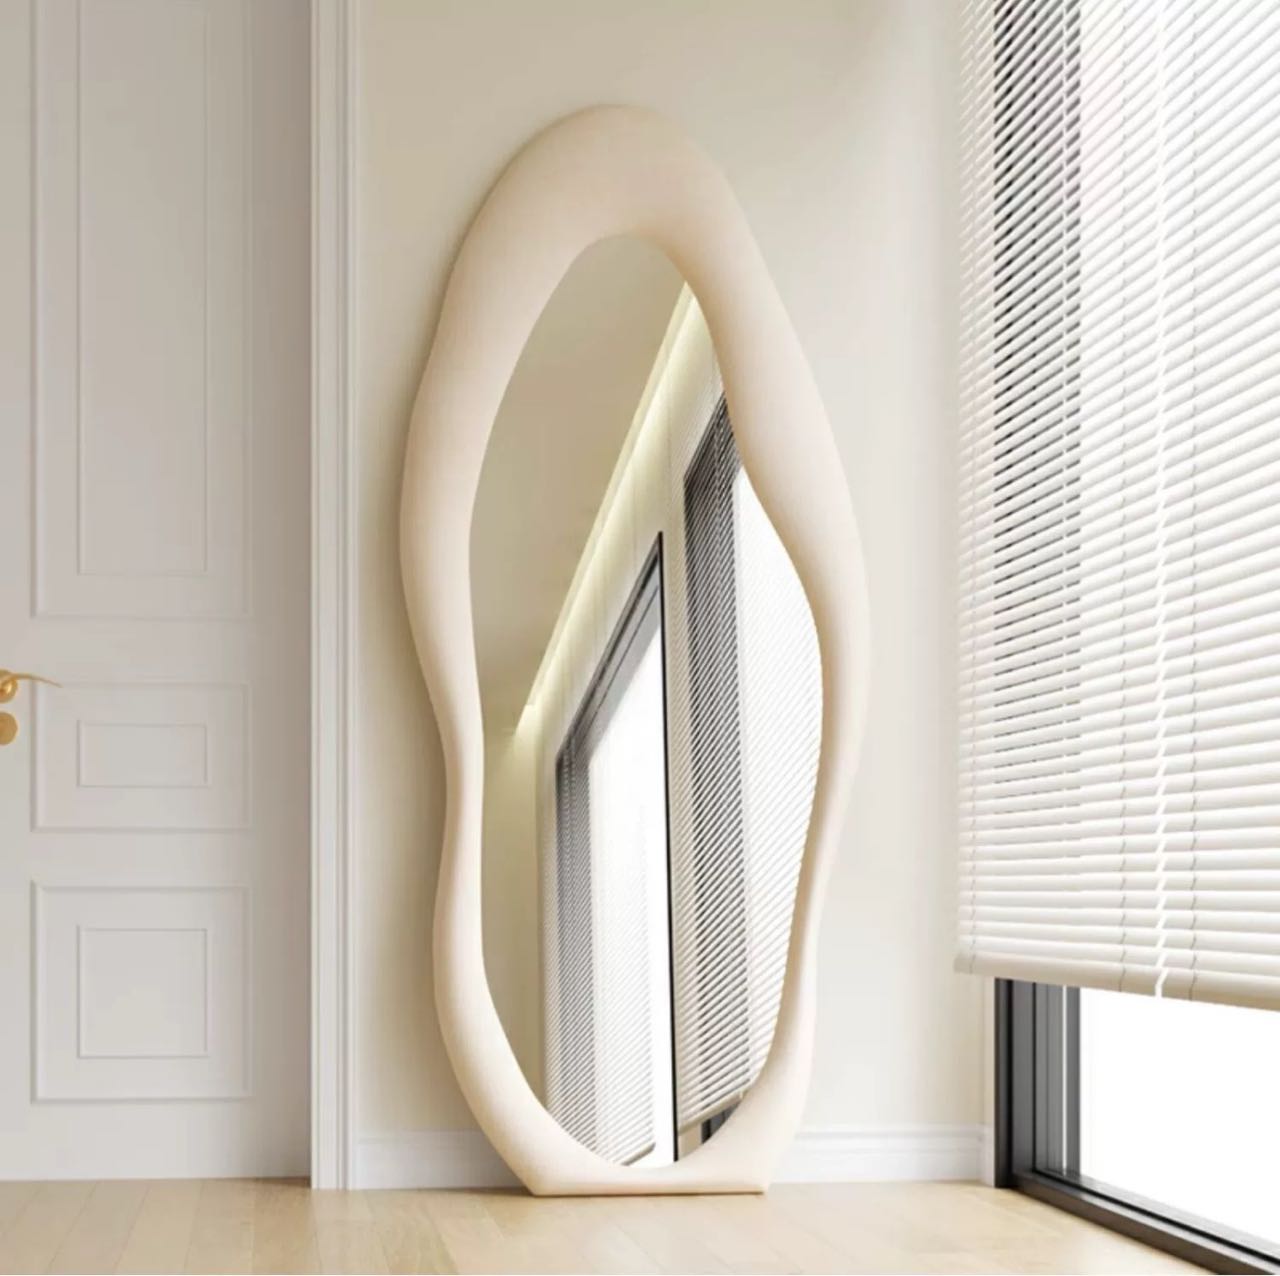 INS Style Cloud-Shaped Full-Length Mirror